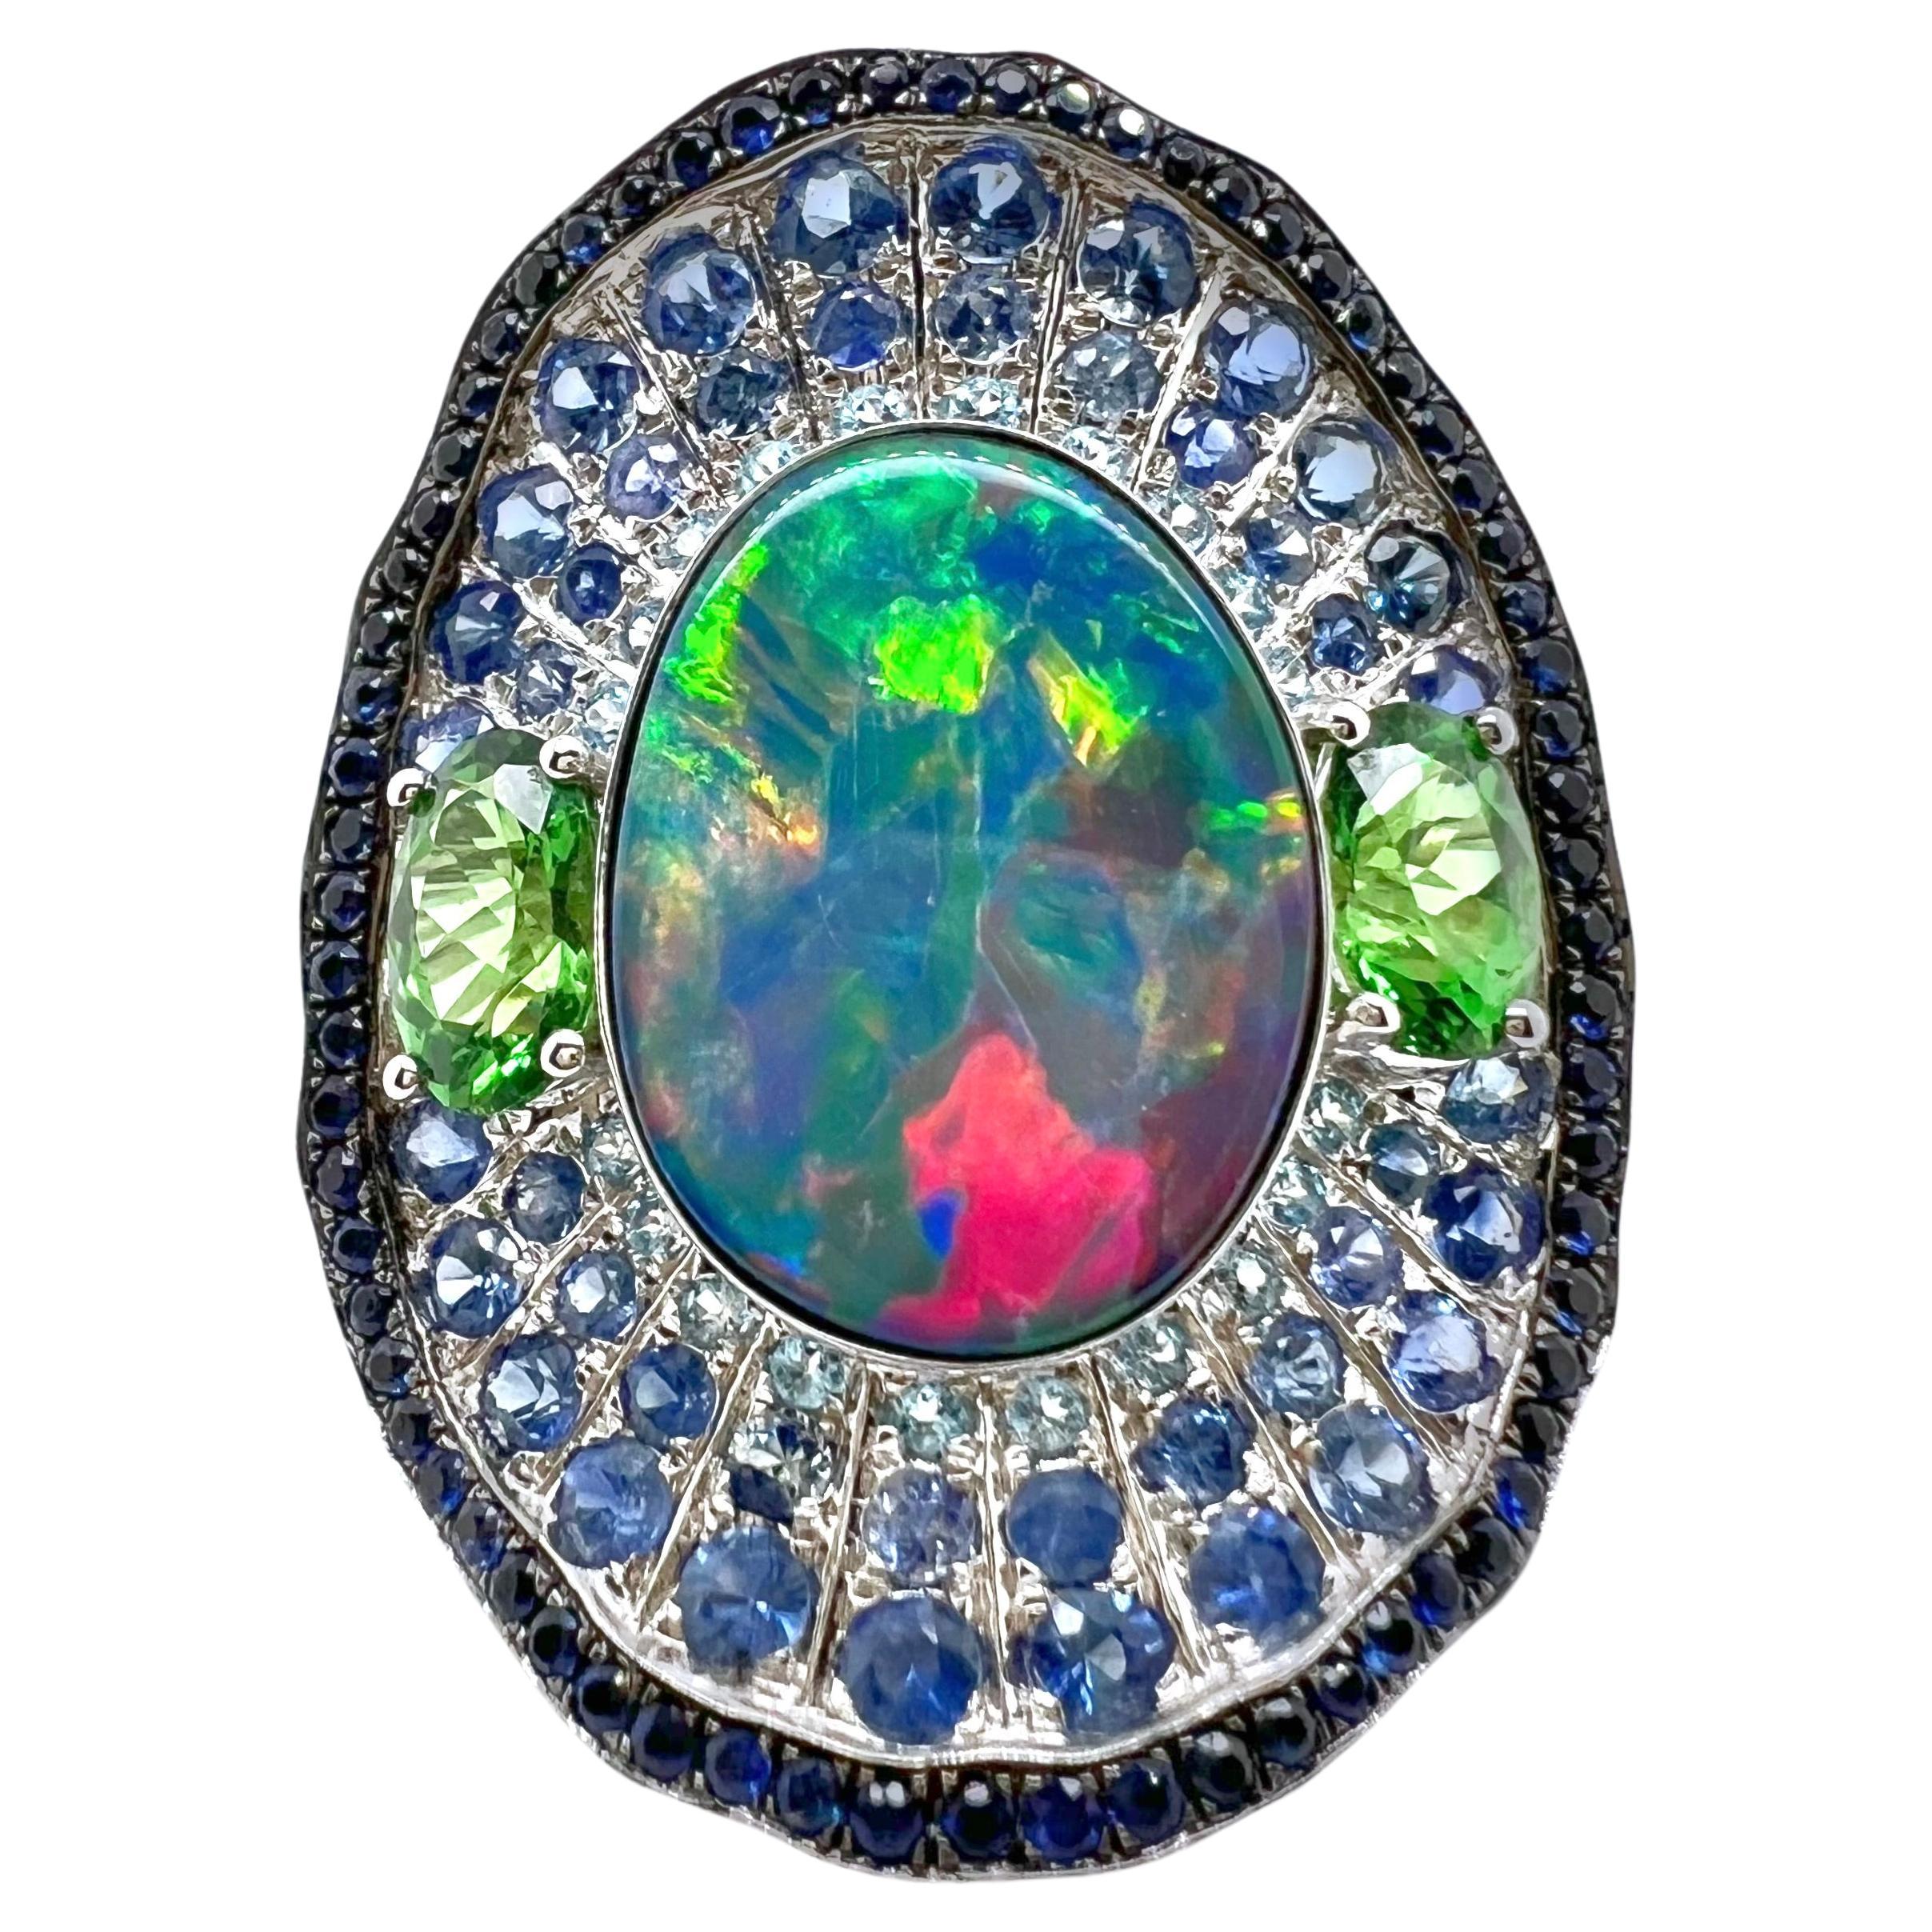 18k White Gold Opal Ring with Tsavorite, Colored Sapphires, and Diamonds